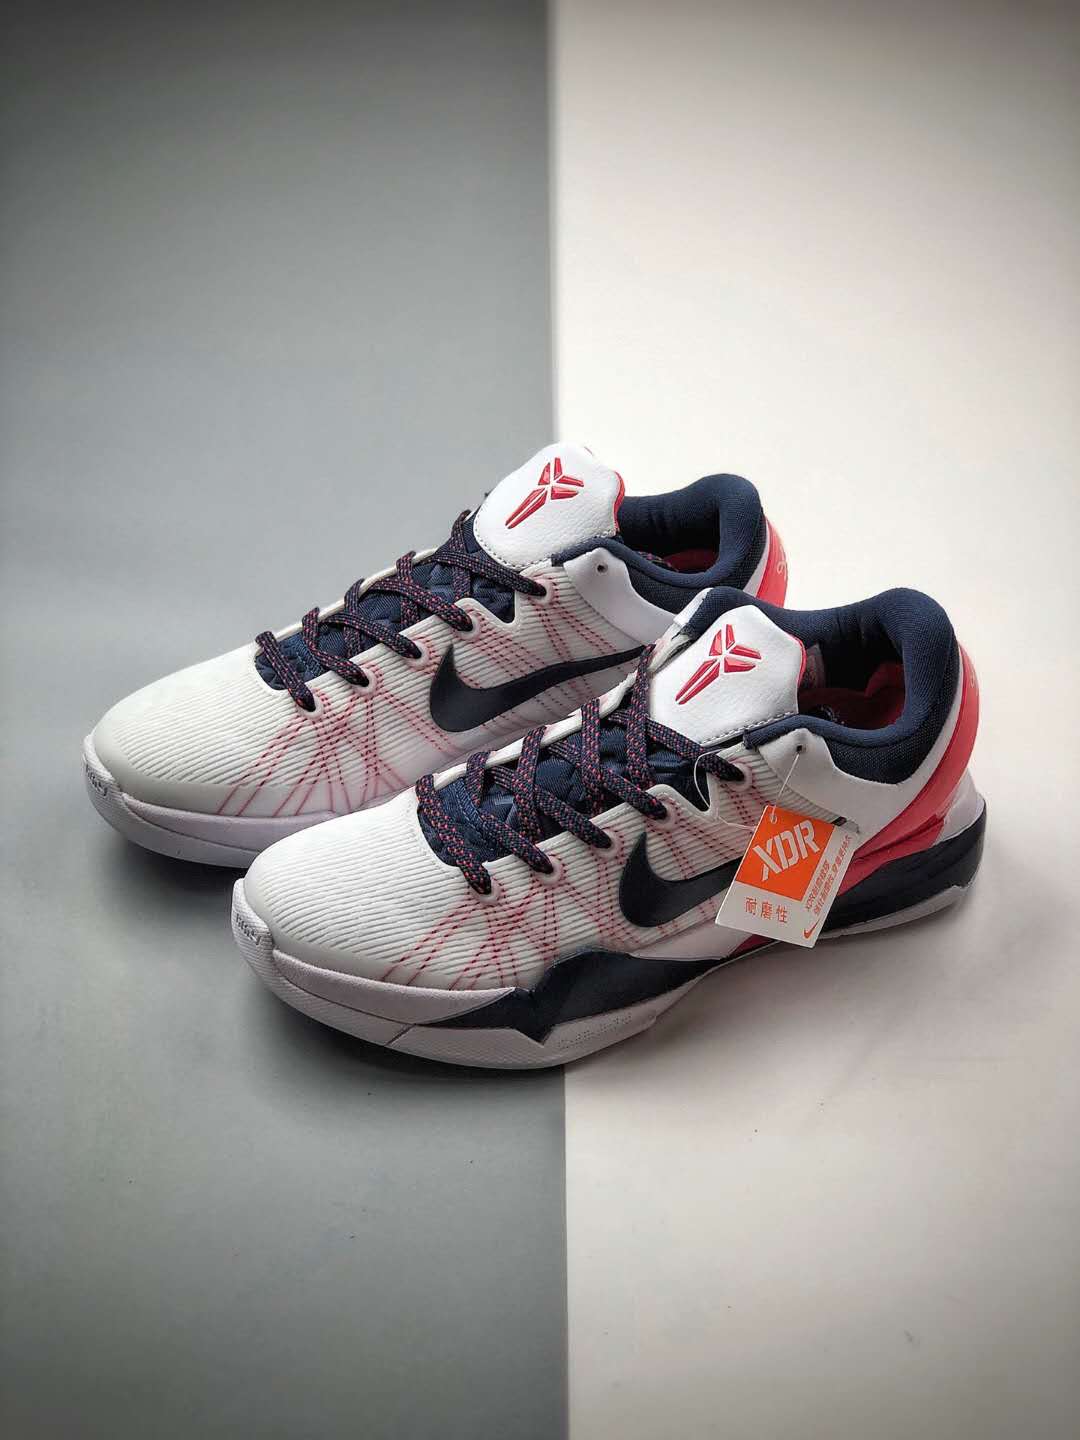 Nike Zoom Kobe 7 System Olympic White Obsidian University Red Pure Platinum 488371-102 - Get the Ultimate Olympic Style!